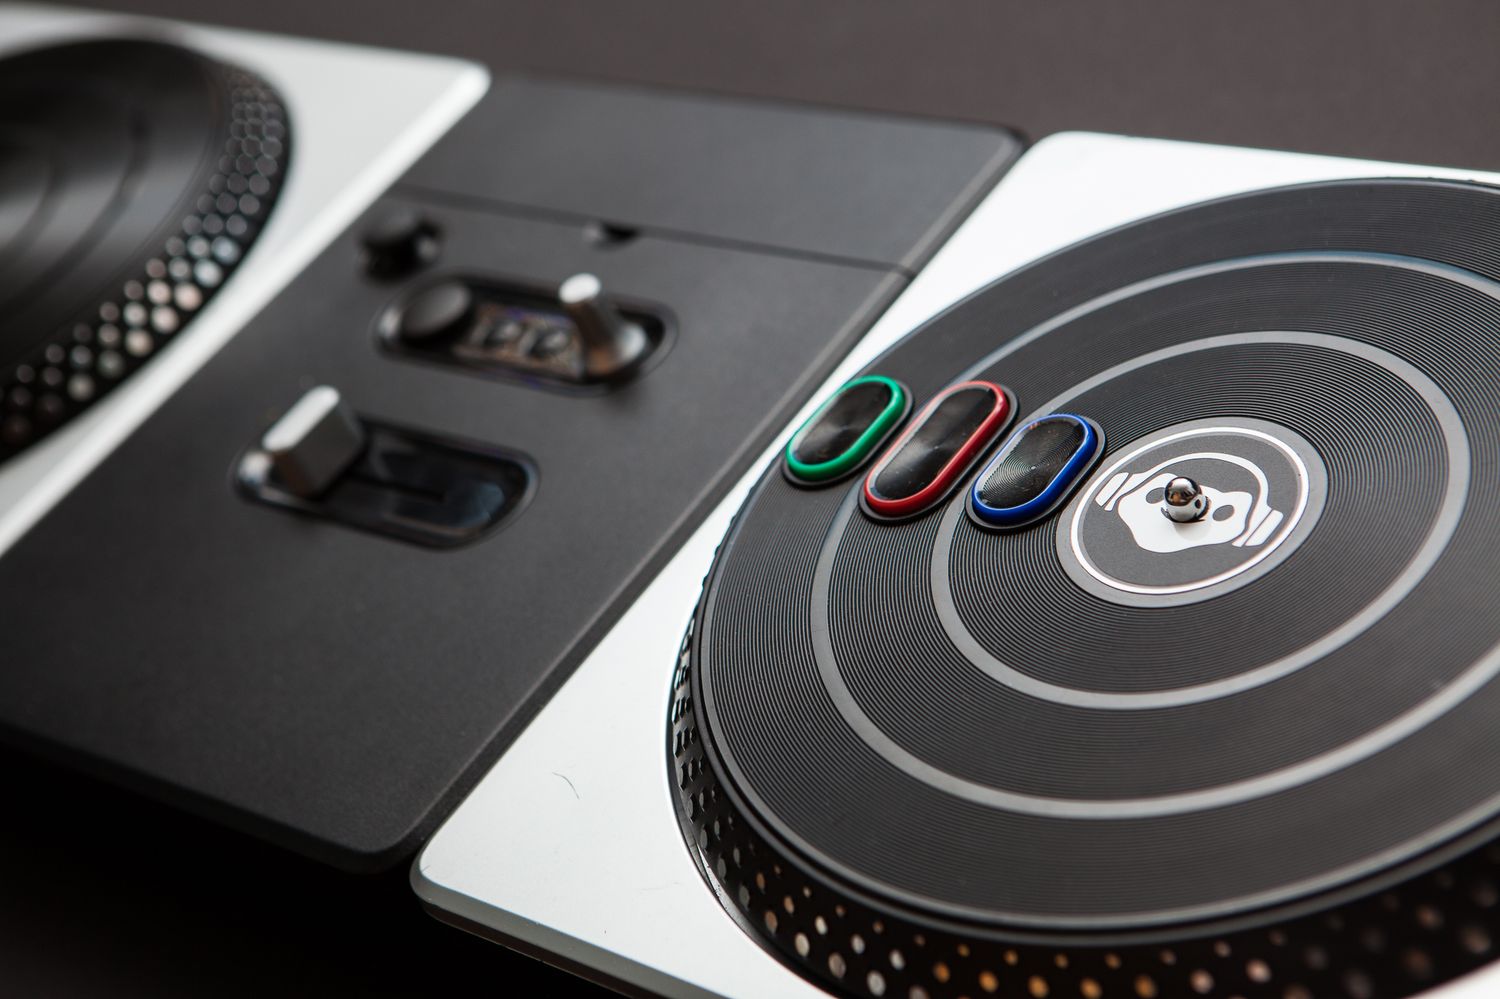 How To Sync DJ Hero Turntable PS3 Without USB